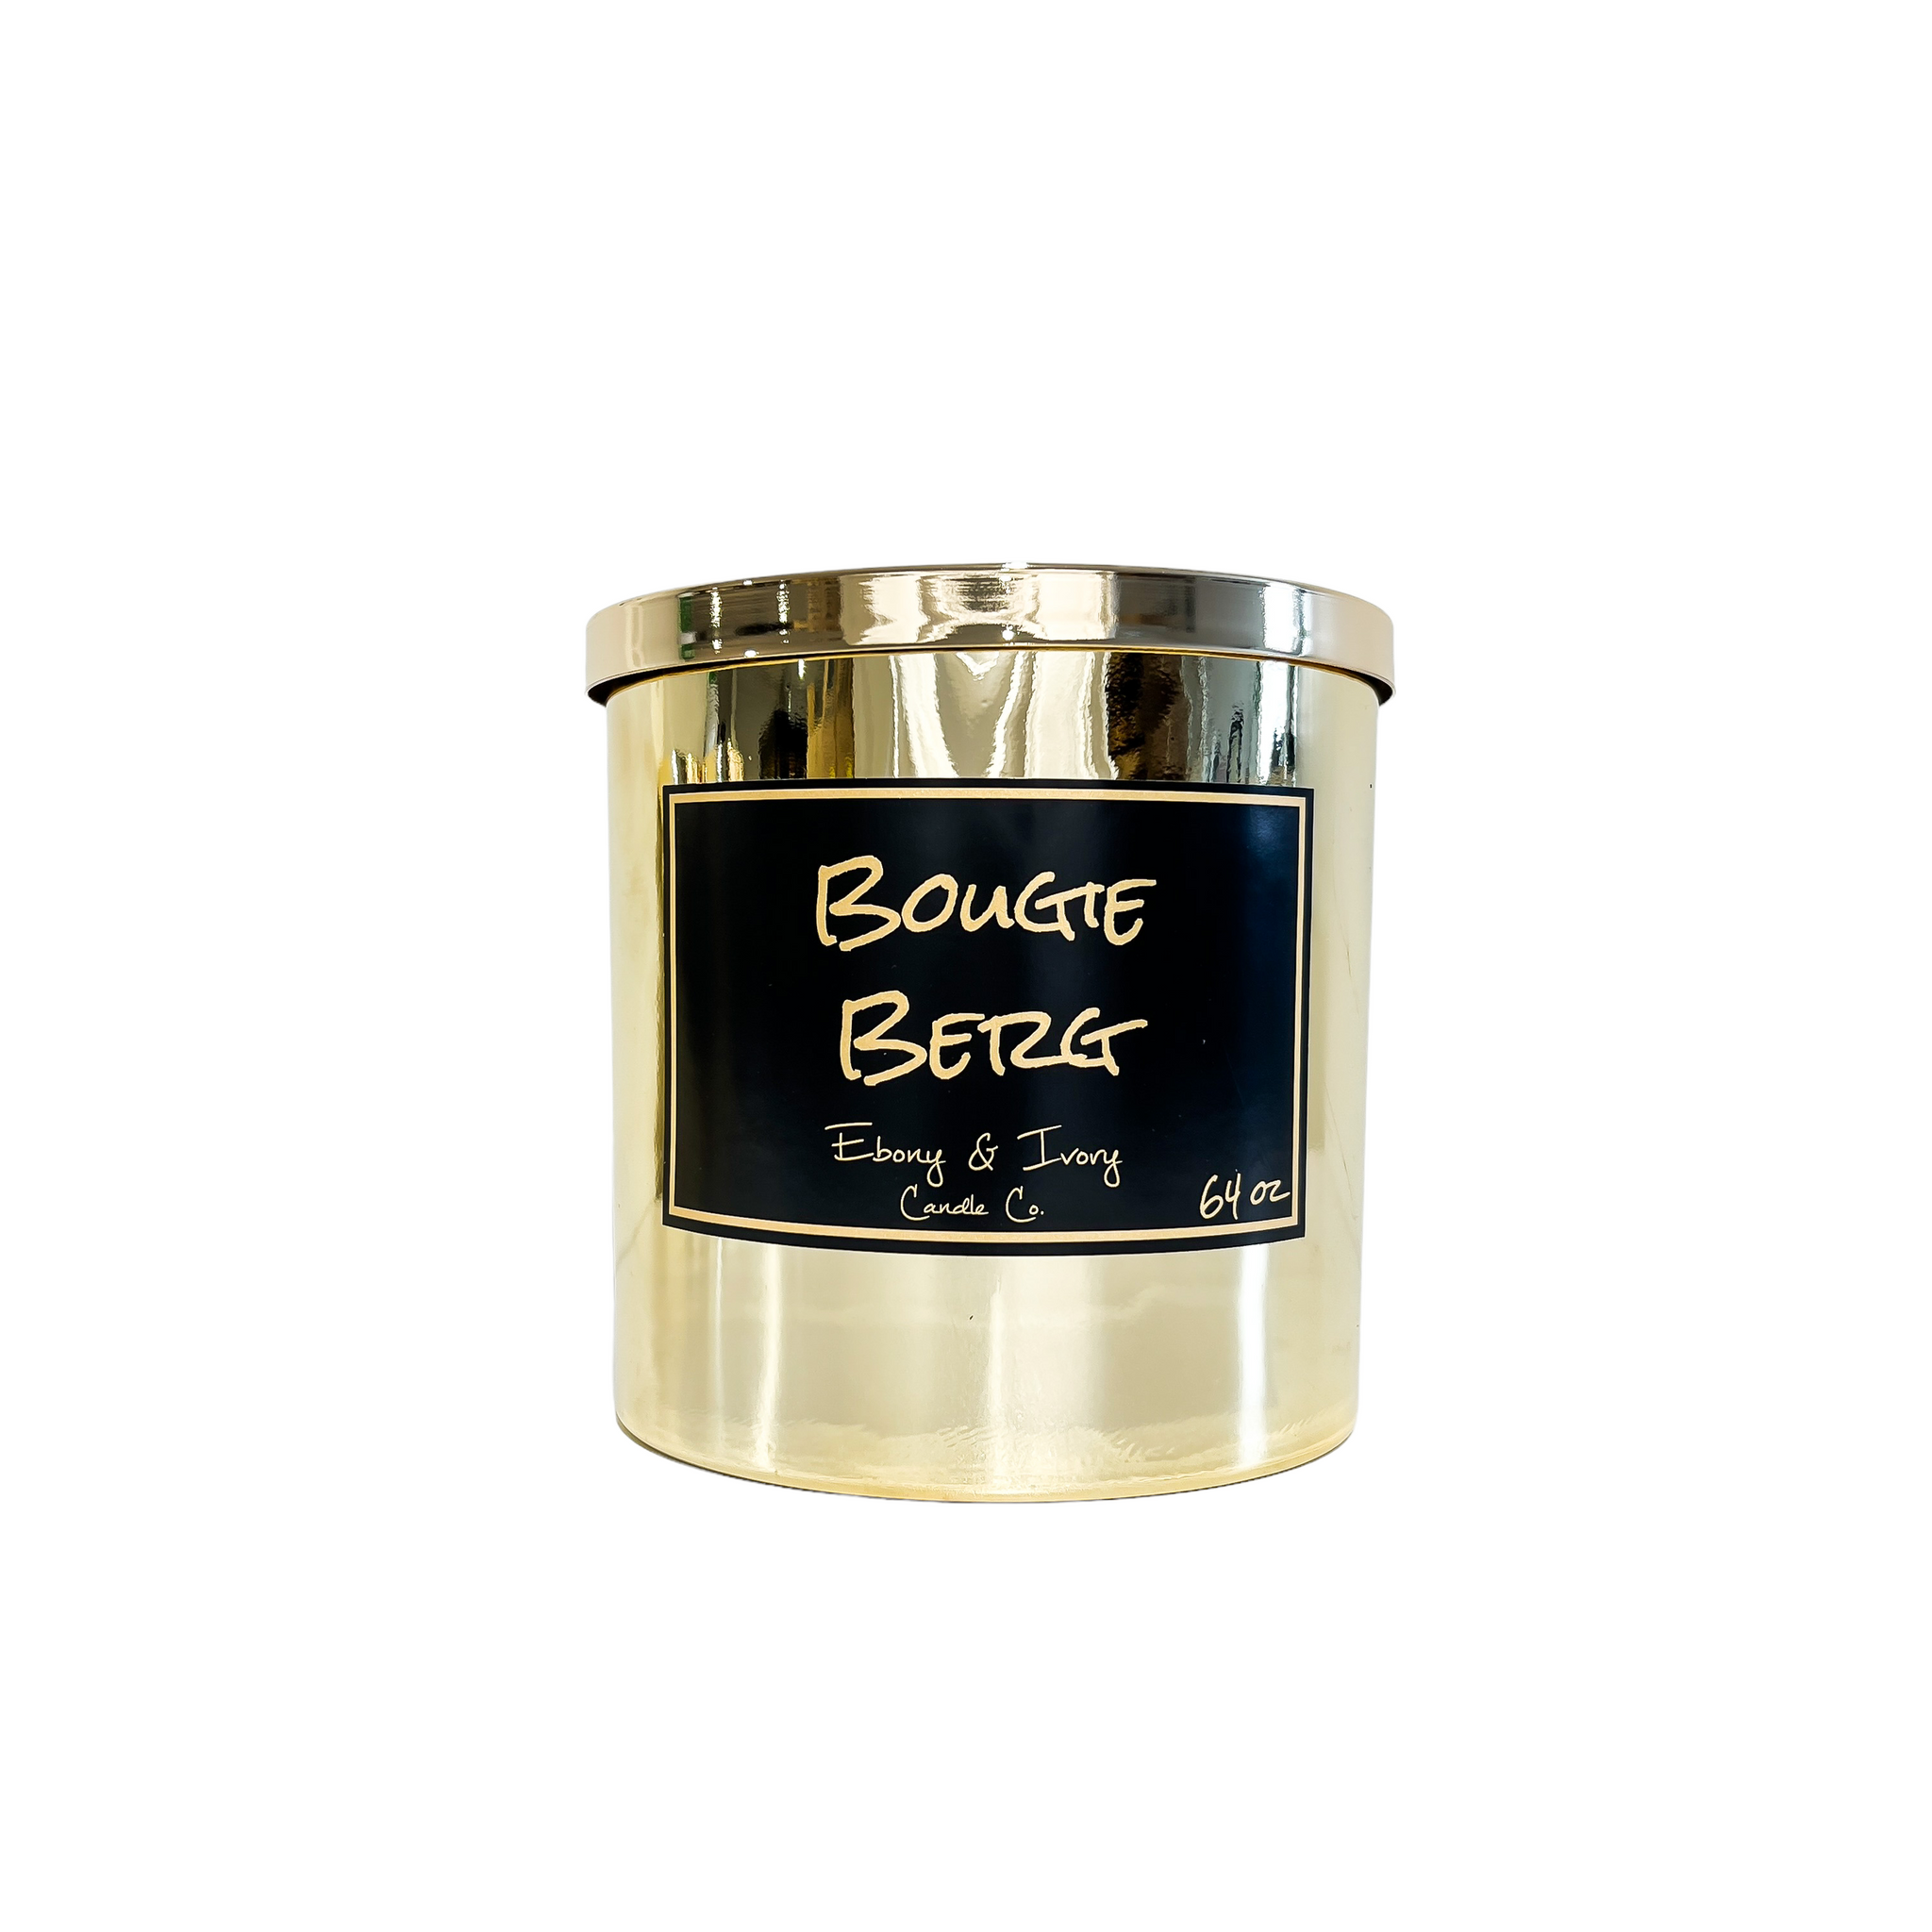 Gold, sixty four ounces, bergamot, sugared citrus, and sandalwood scented soy wax candle with a gold lid and a black label that reads Bougie Berg